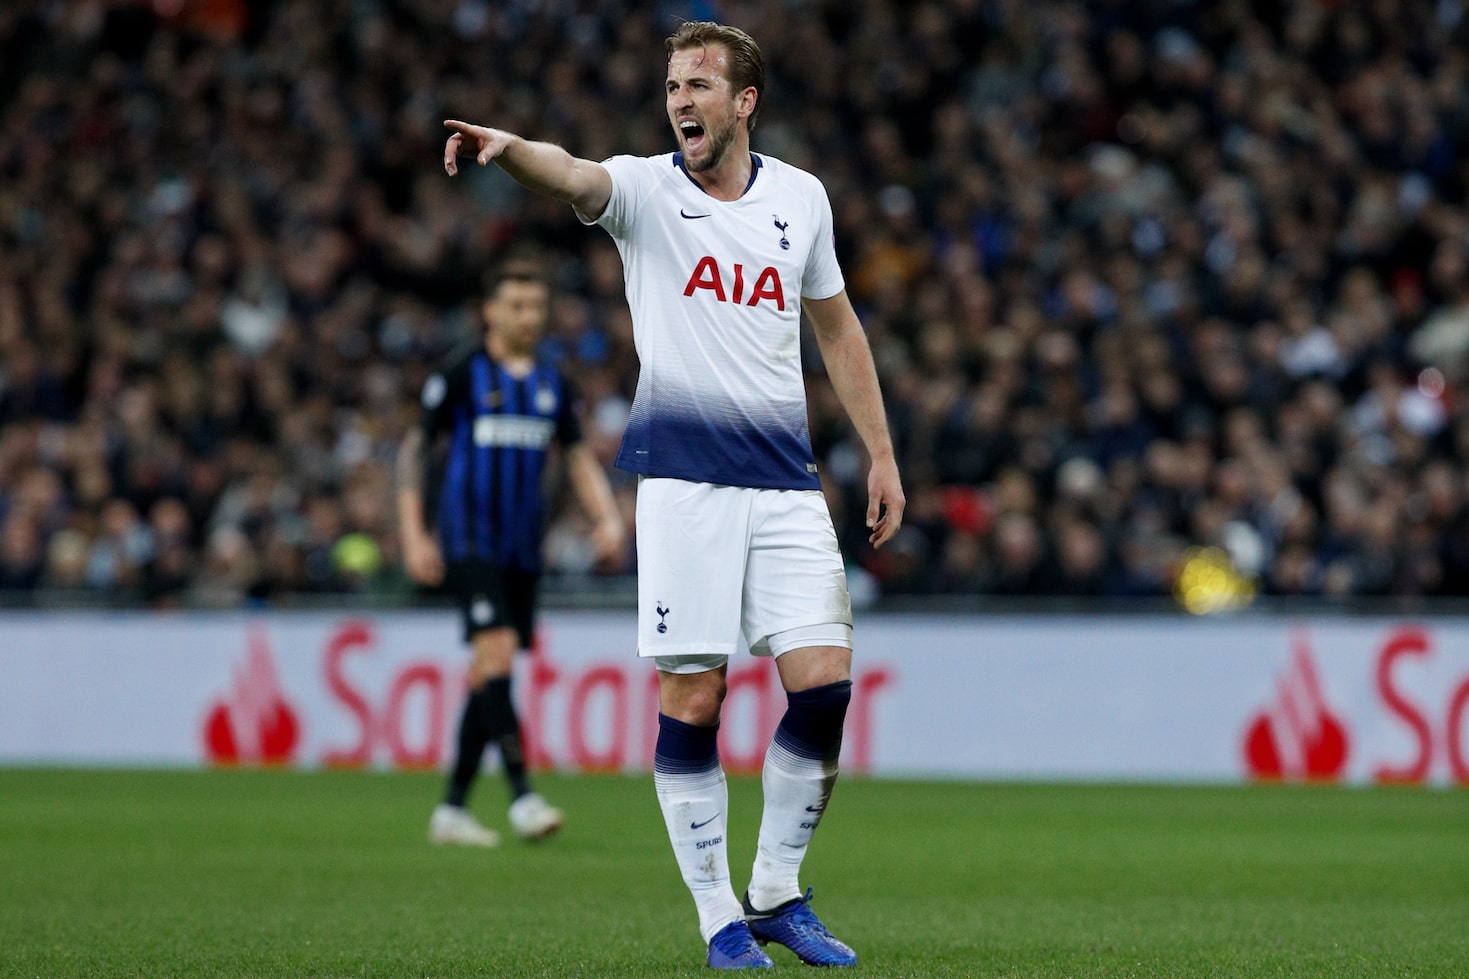 Kane is a top scorer for England and Tottenham